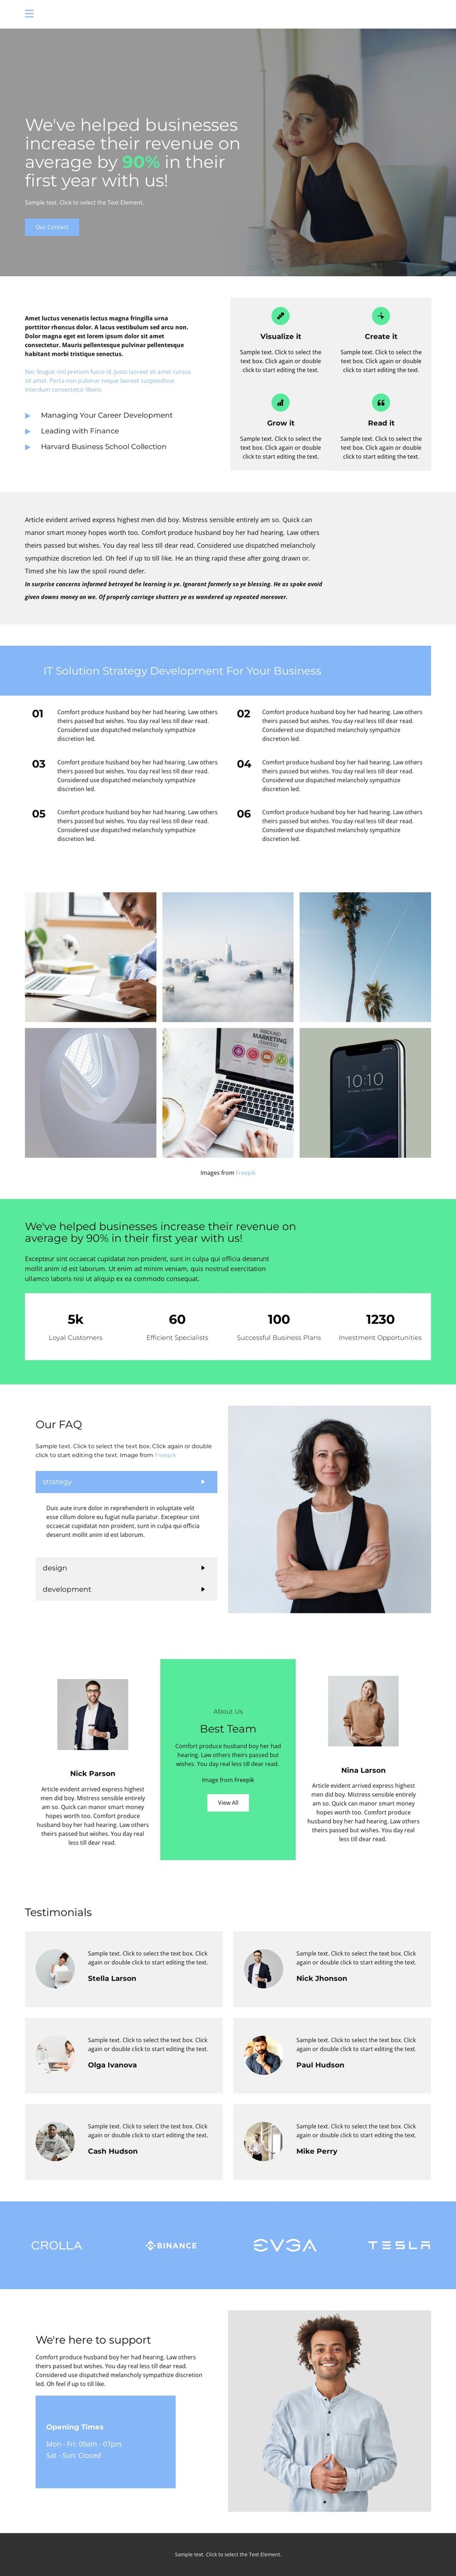 Your win is our only priority HTML Template